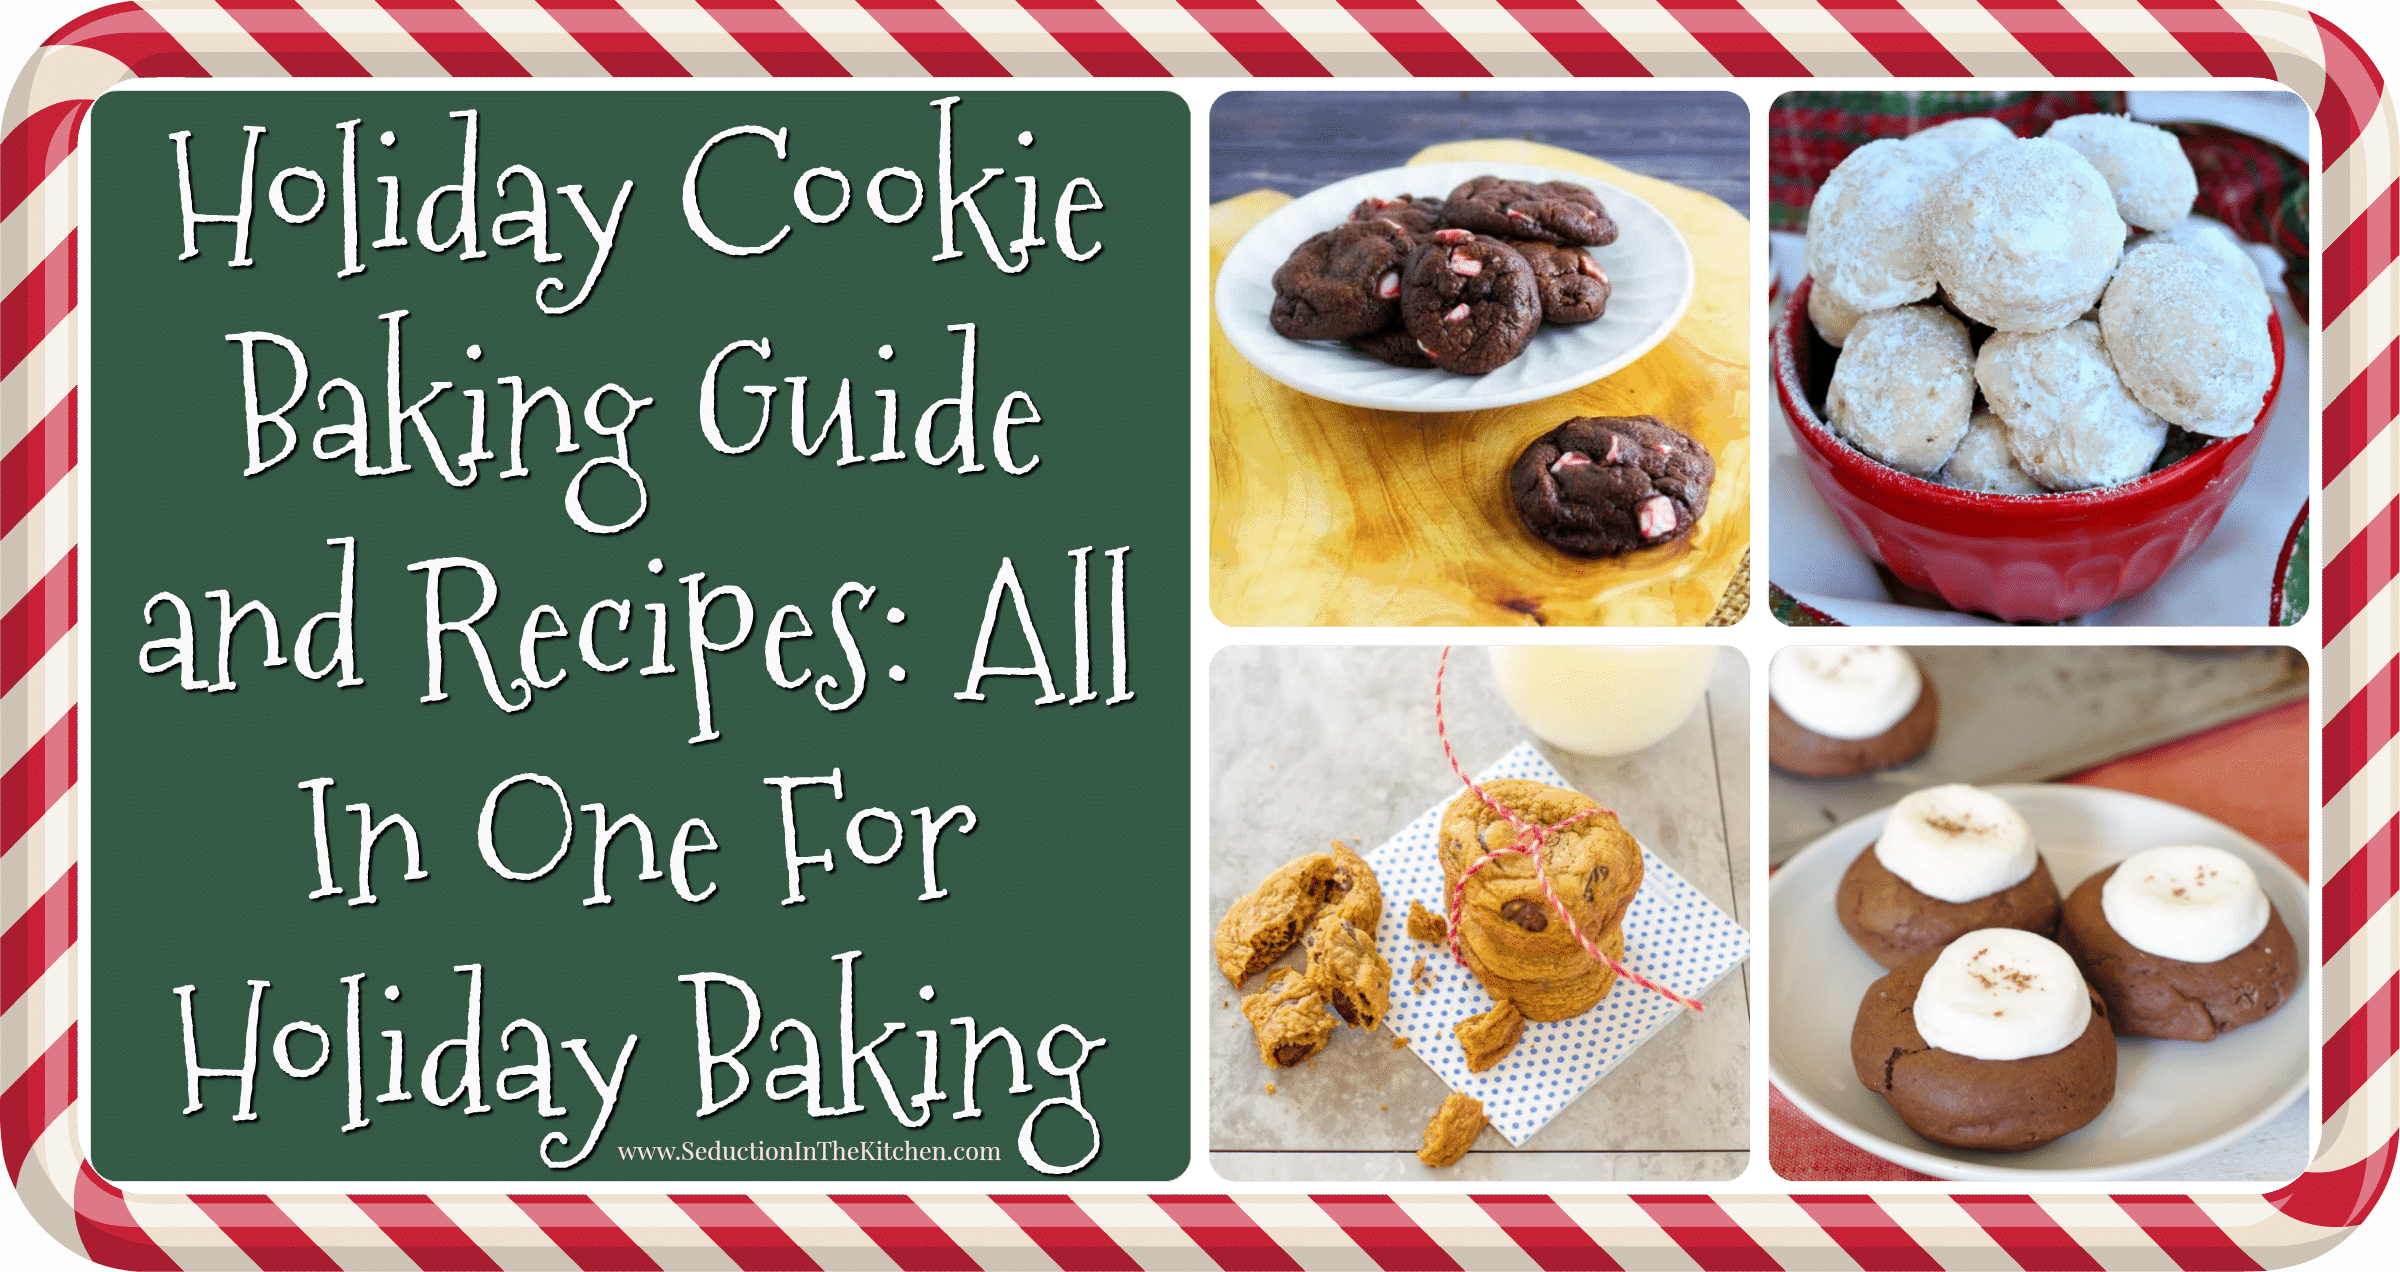 Holiday Cookie Baking Guide and Recipes are full of tips and tricks to create the perfect cookies for the holiday season. If you want to bake the best cookies this holiday season then this guide is what you need. Plus it has some really nice recipes you can follow as well!